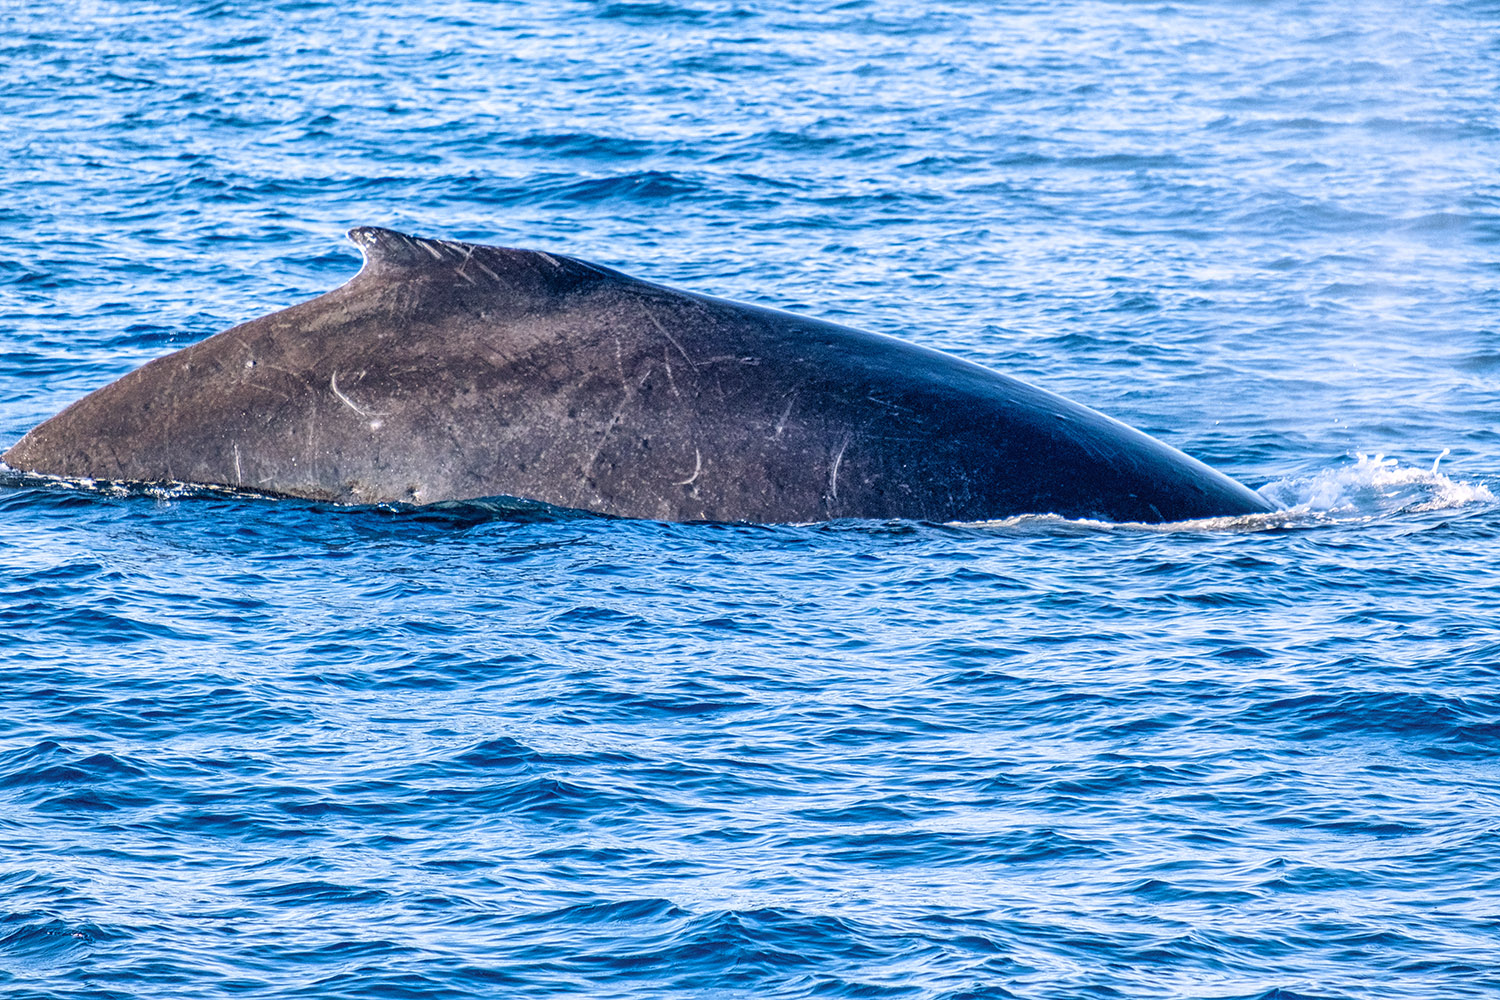 Experts can tell whales apart by the pattern of scars on their bodies